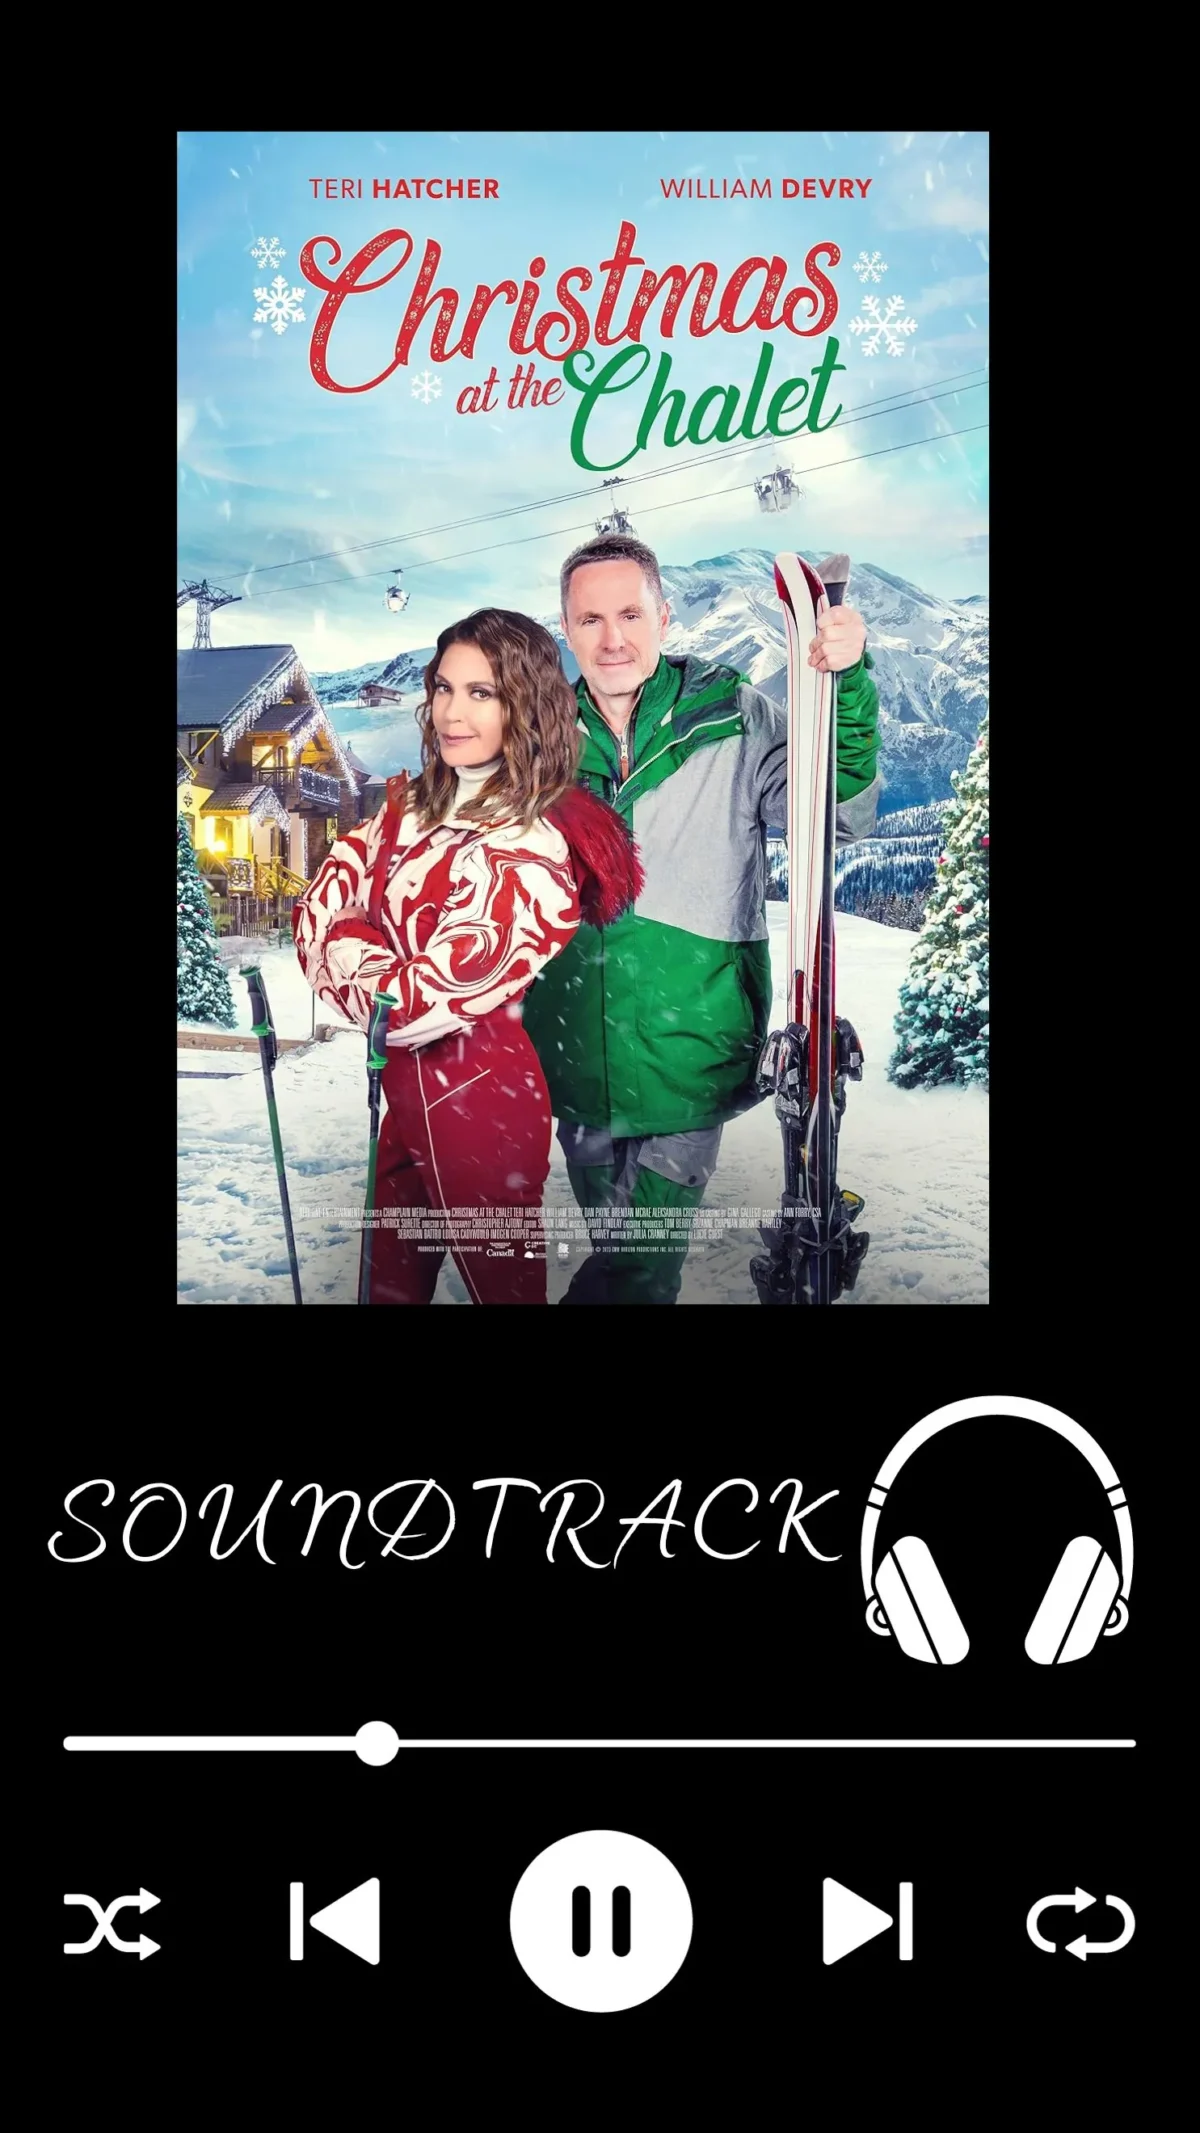 Christmas At The Chalet Soundtrack